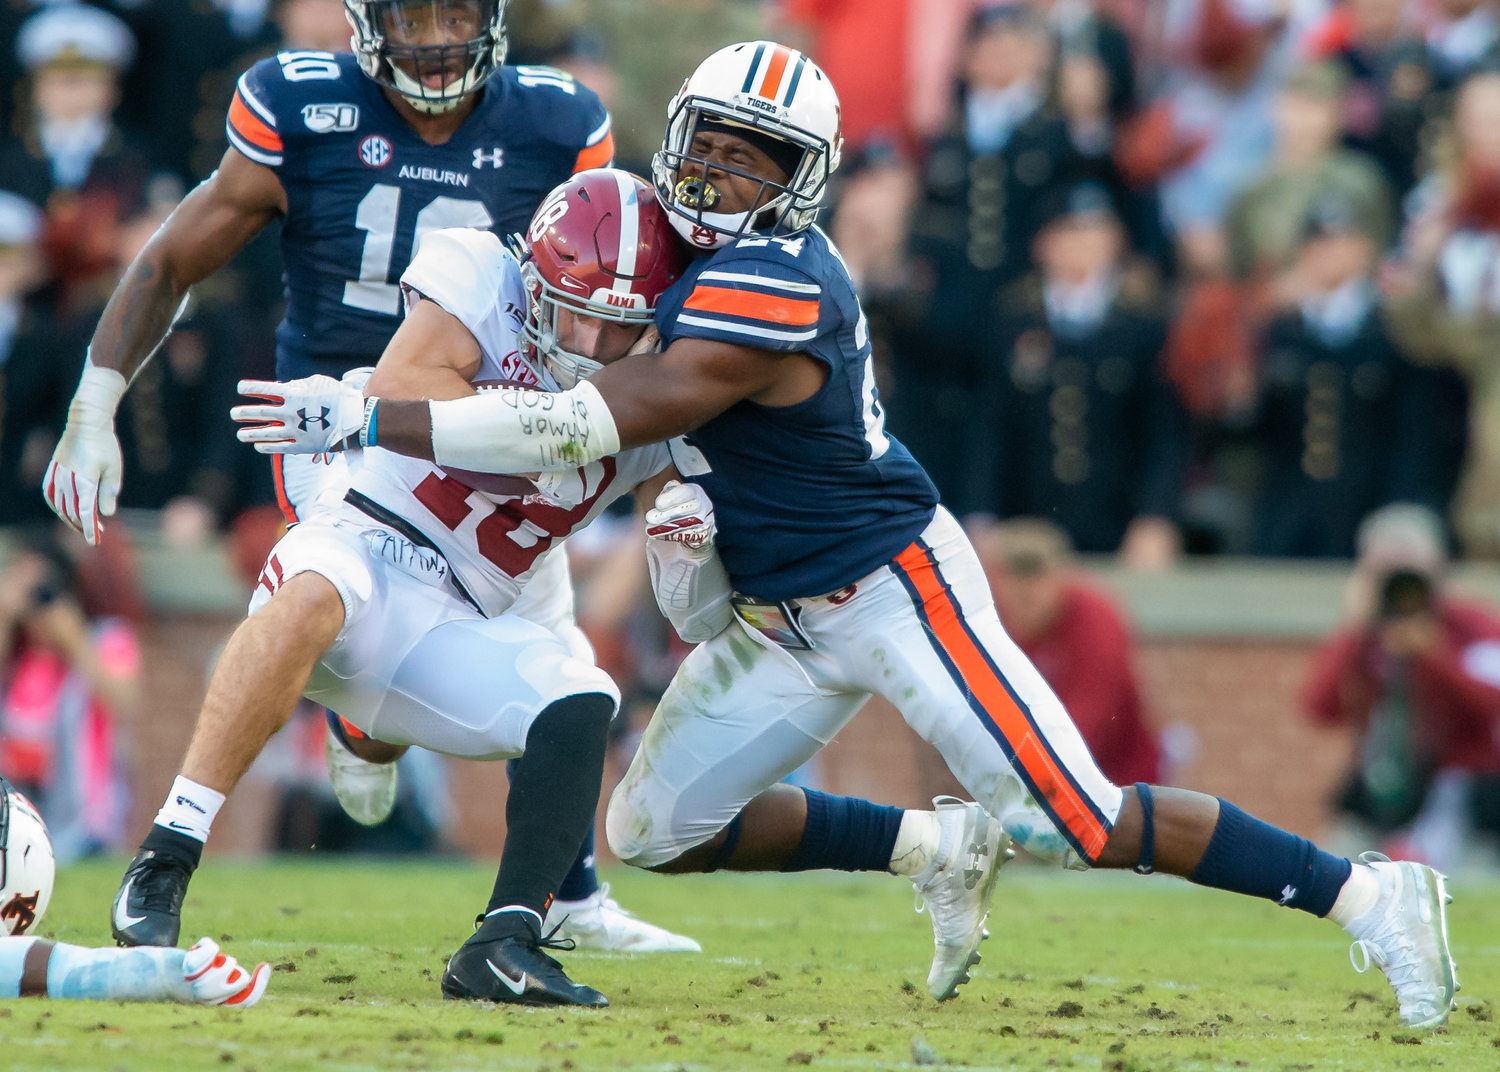 Alabama Crimson Tide wide receiver Slade Bolden (18) is tackled by Auburn Tigers defensive back Daniel Thomas (24) during the first half of Saturday's game, at Jordan-Hare Stadium in Auburn, AL. Daily Mountain Eagle -  Jeff Johnsey